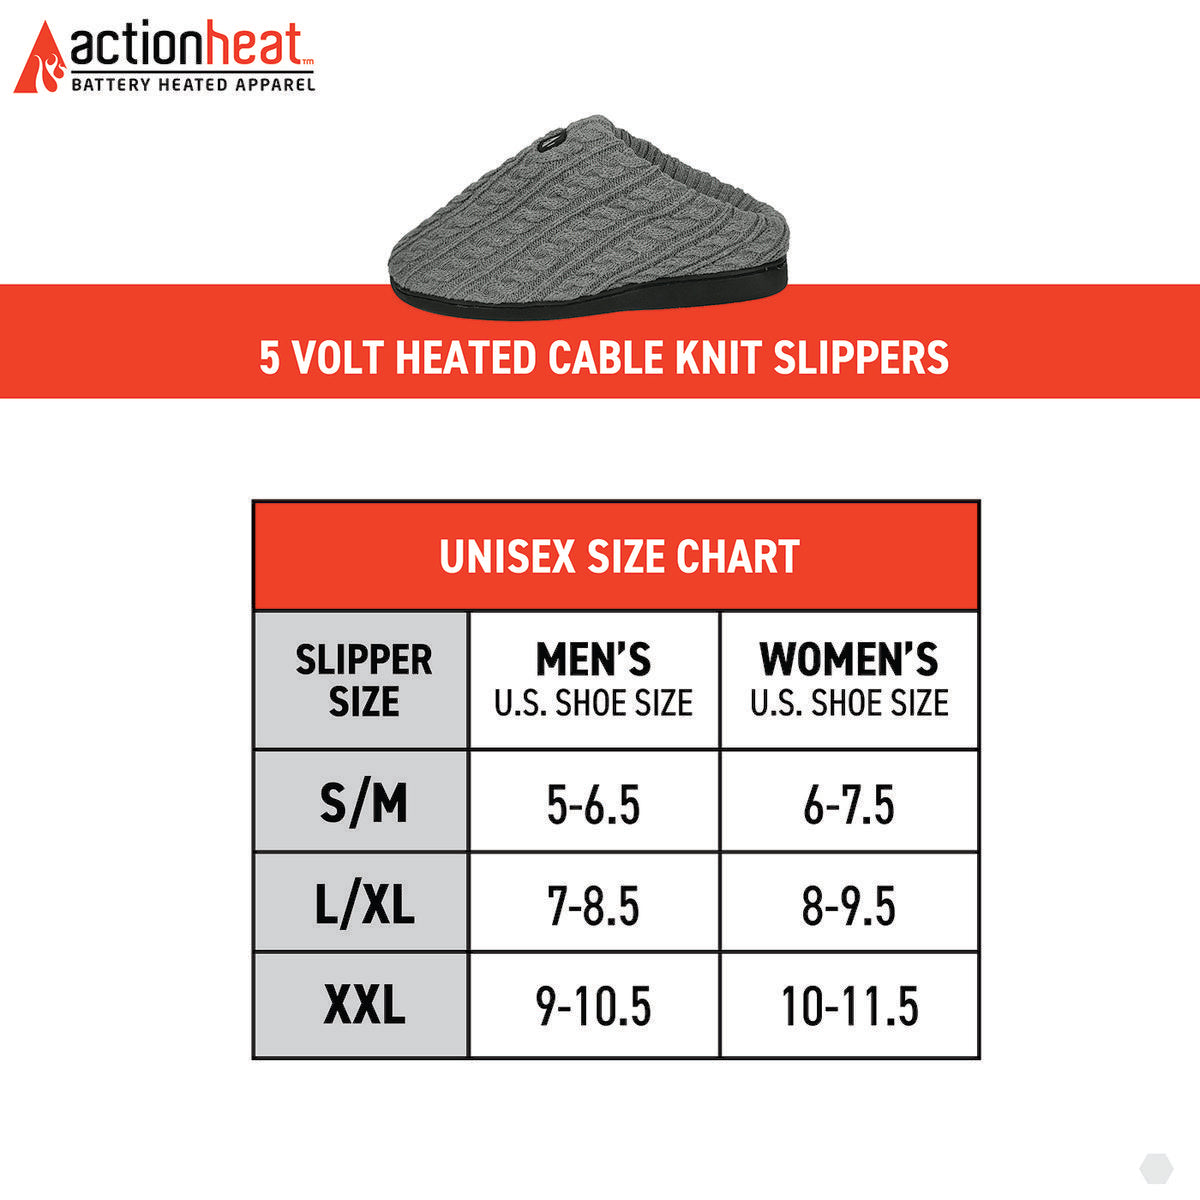 ActionHeat 5V Battery Heated Cable Knit Slippers - Battery